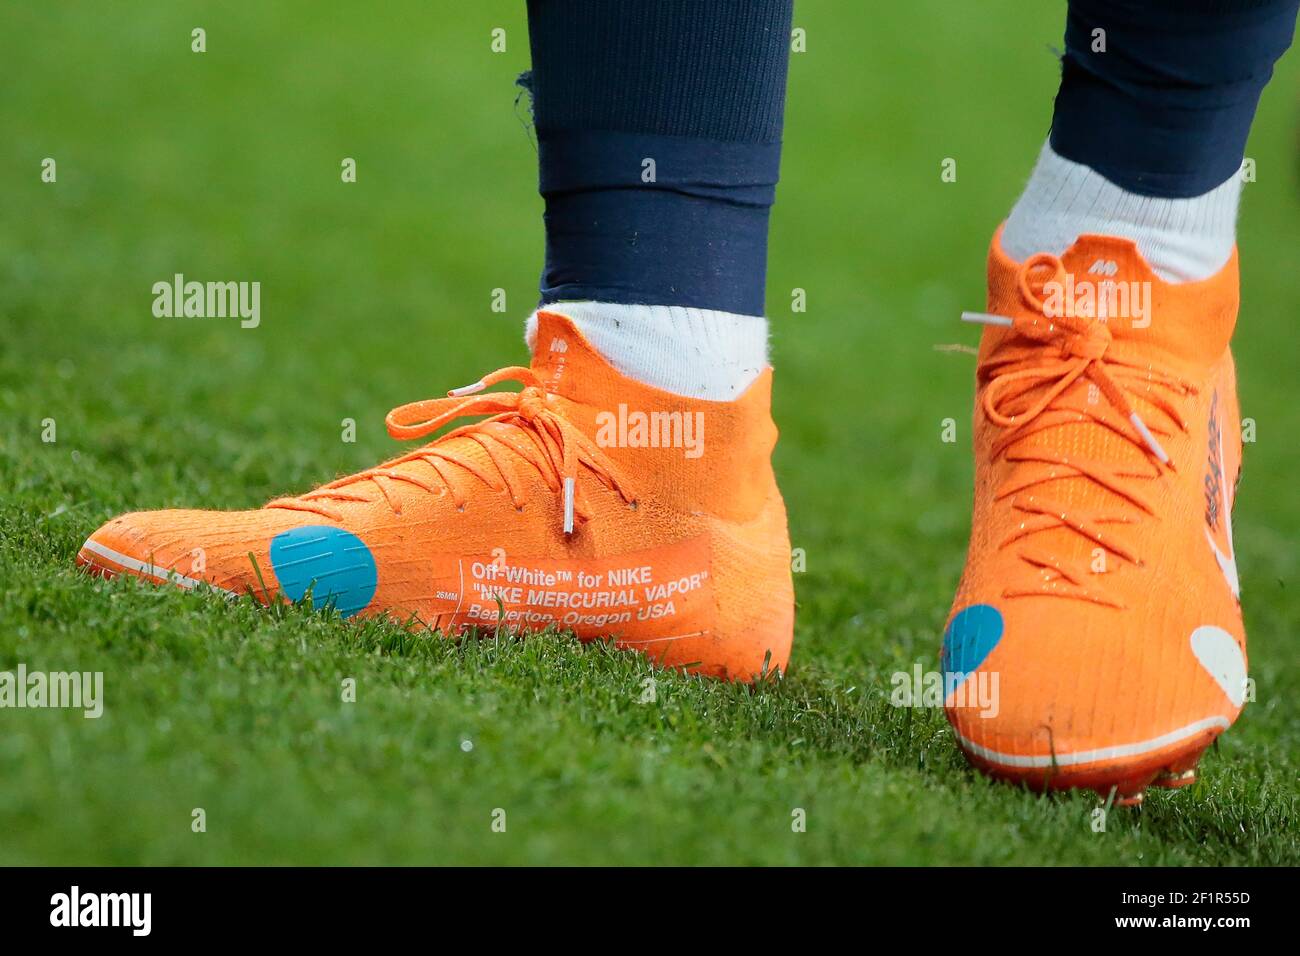 practice Monet enthusiastic Shoes of Kylian Mbappe (PSG), Off-White ™ for NIKE 'Nike Mercurial Vapore'  Beaverton, Oregon USA c. 2018 'KNIT', during the French championship L1  football match between Paris Saint-Germain (PSG) and Monaco, on